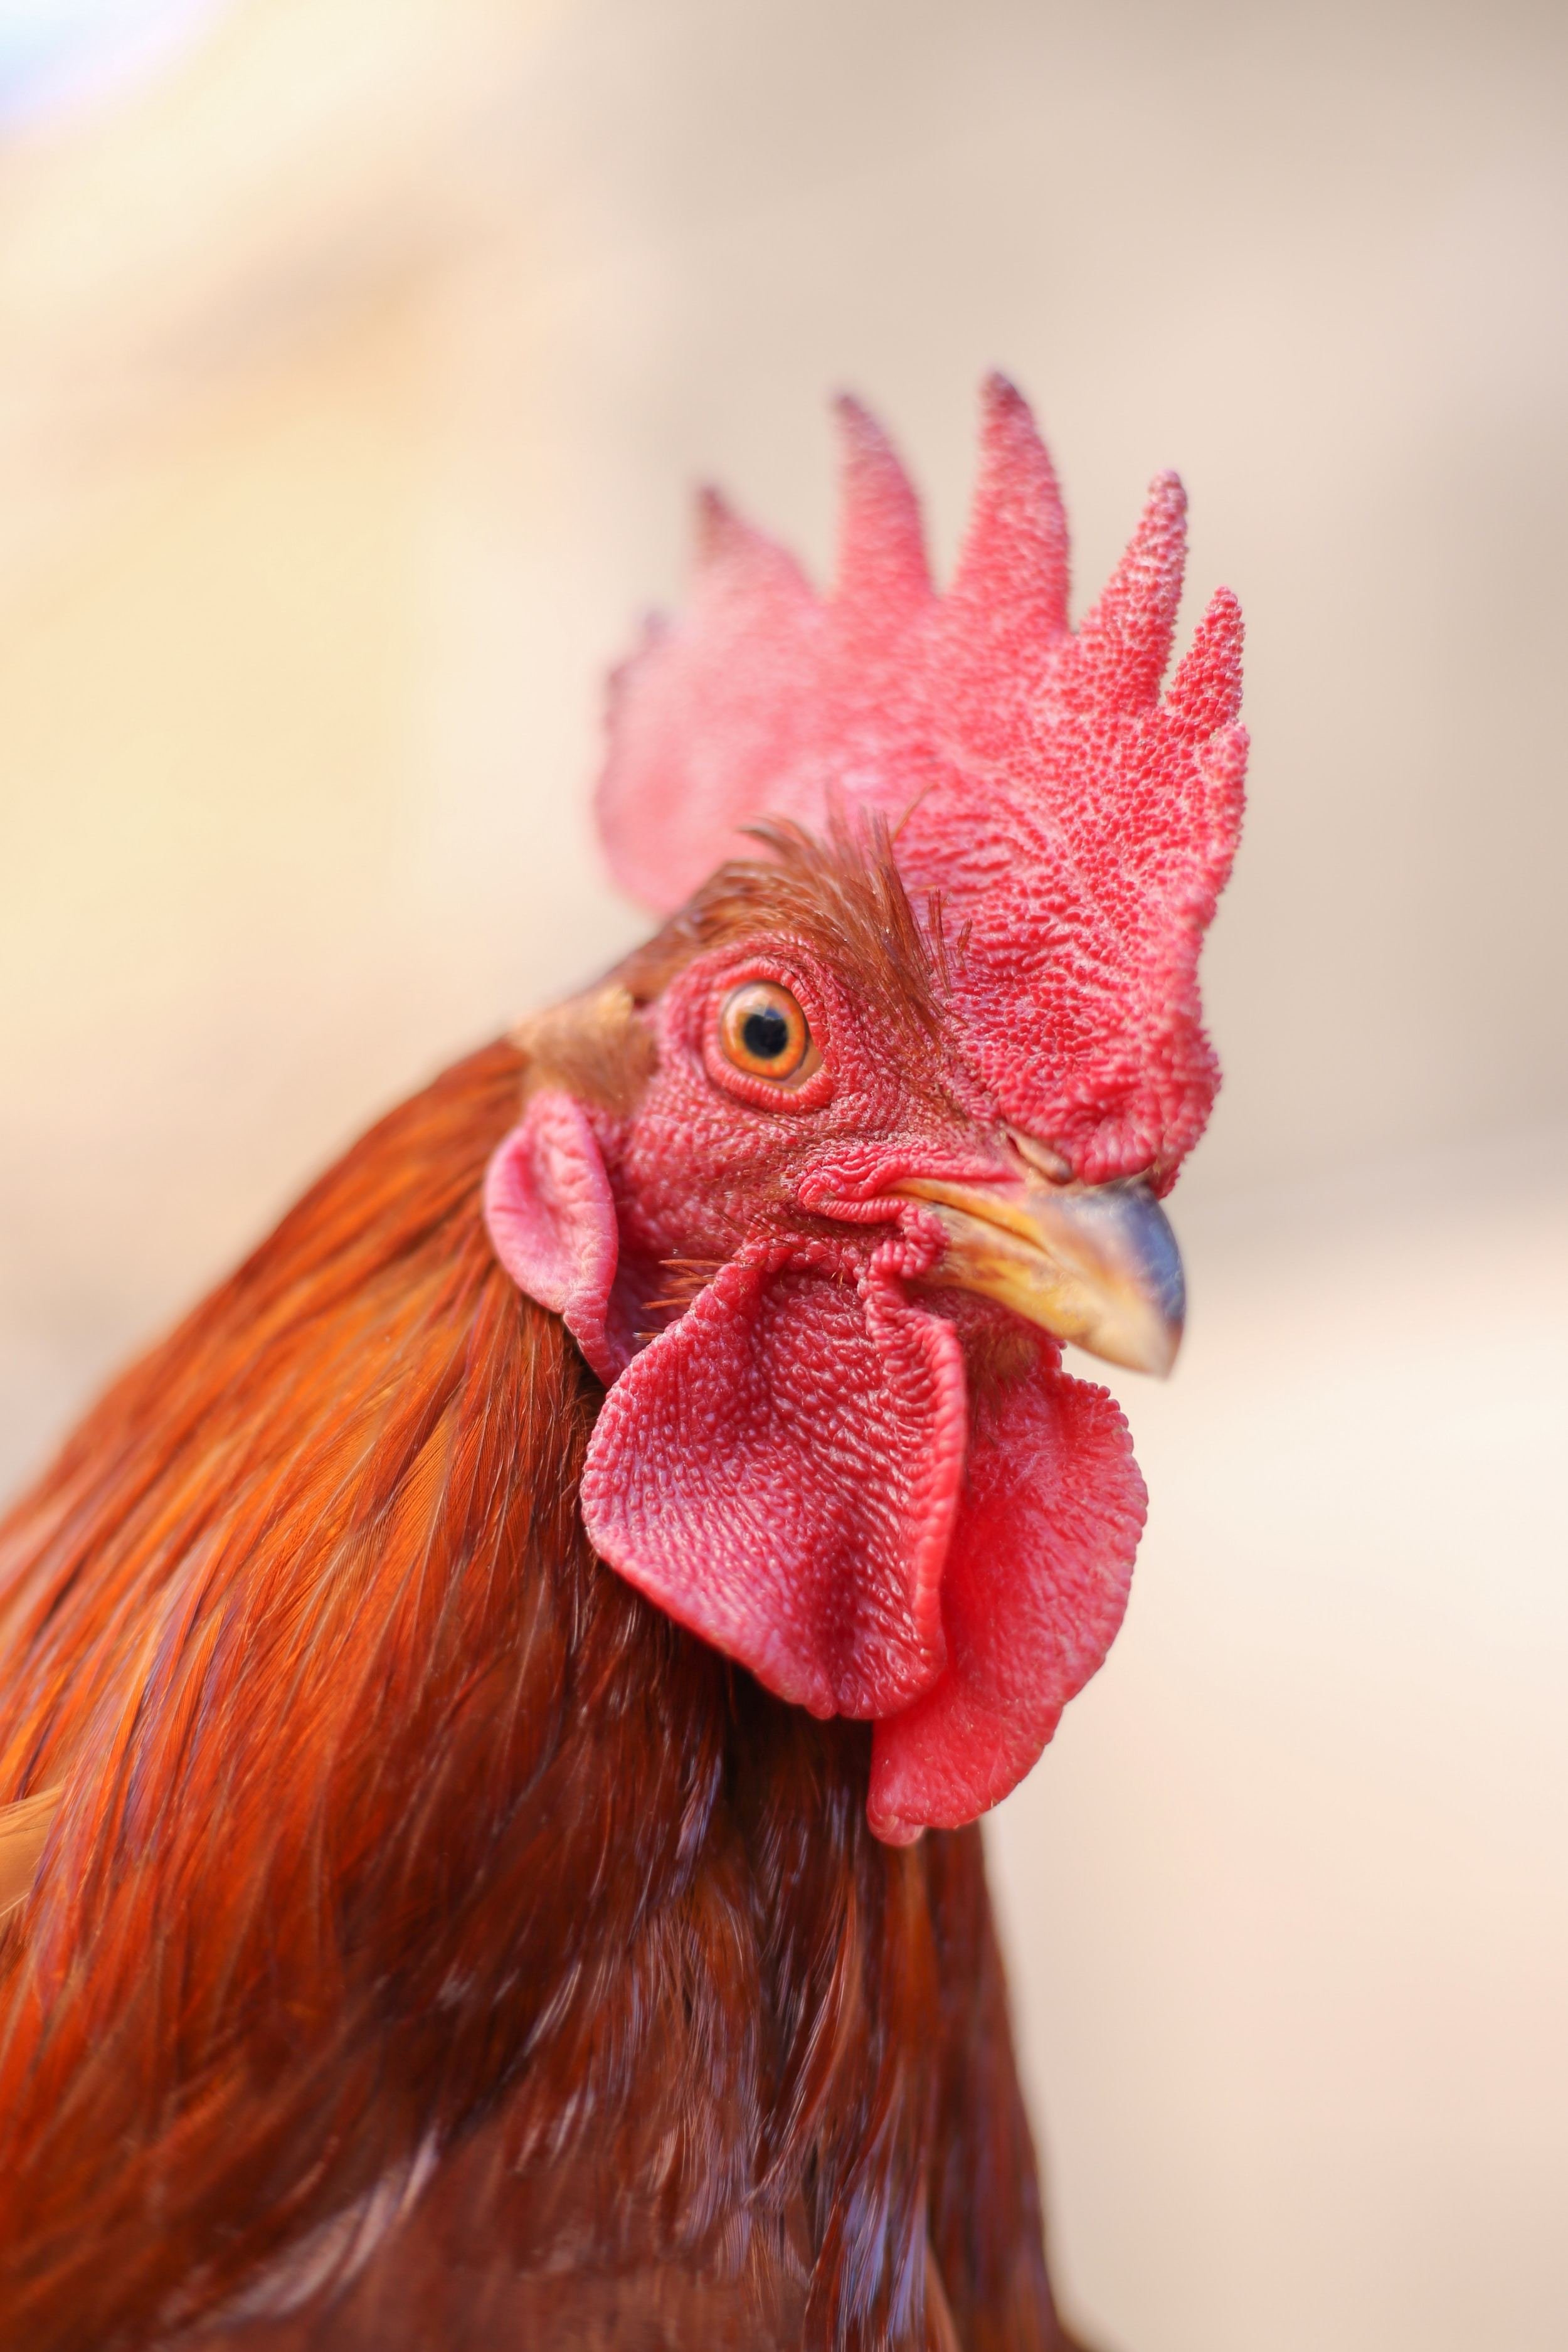 The face of a red rooster.